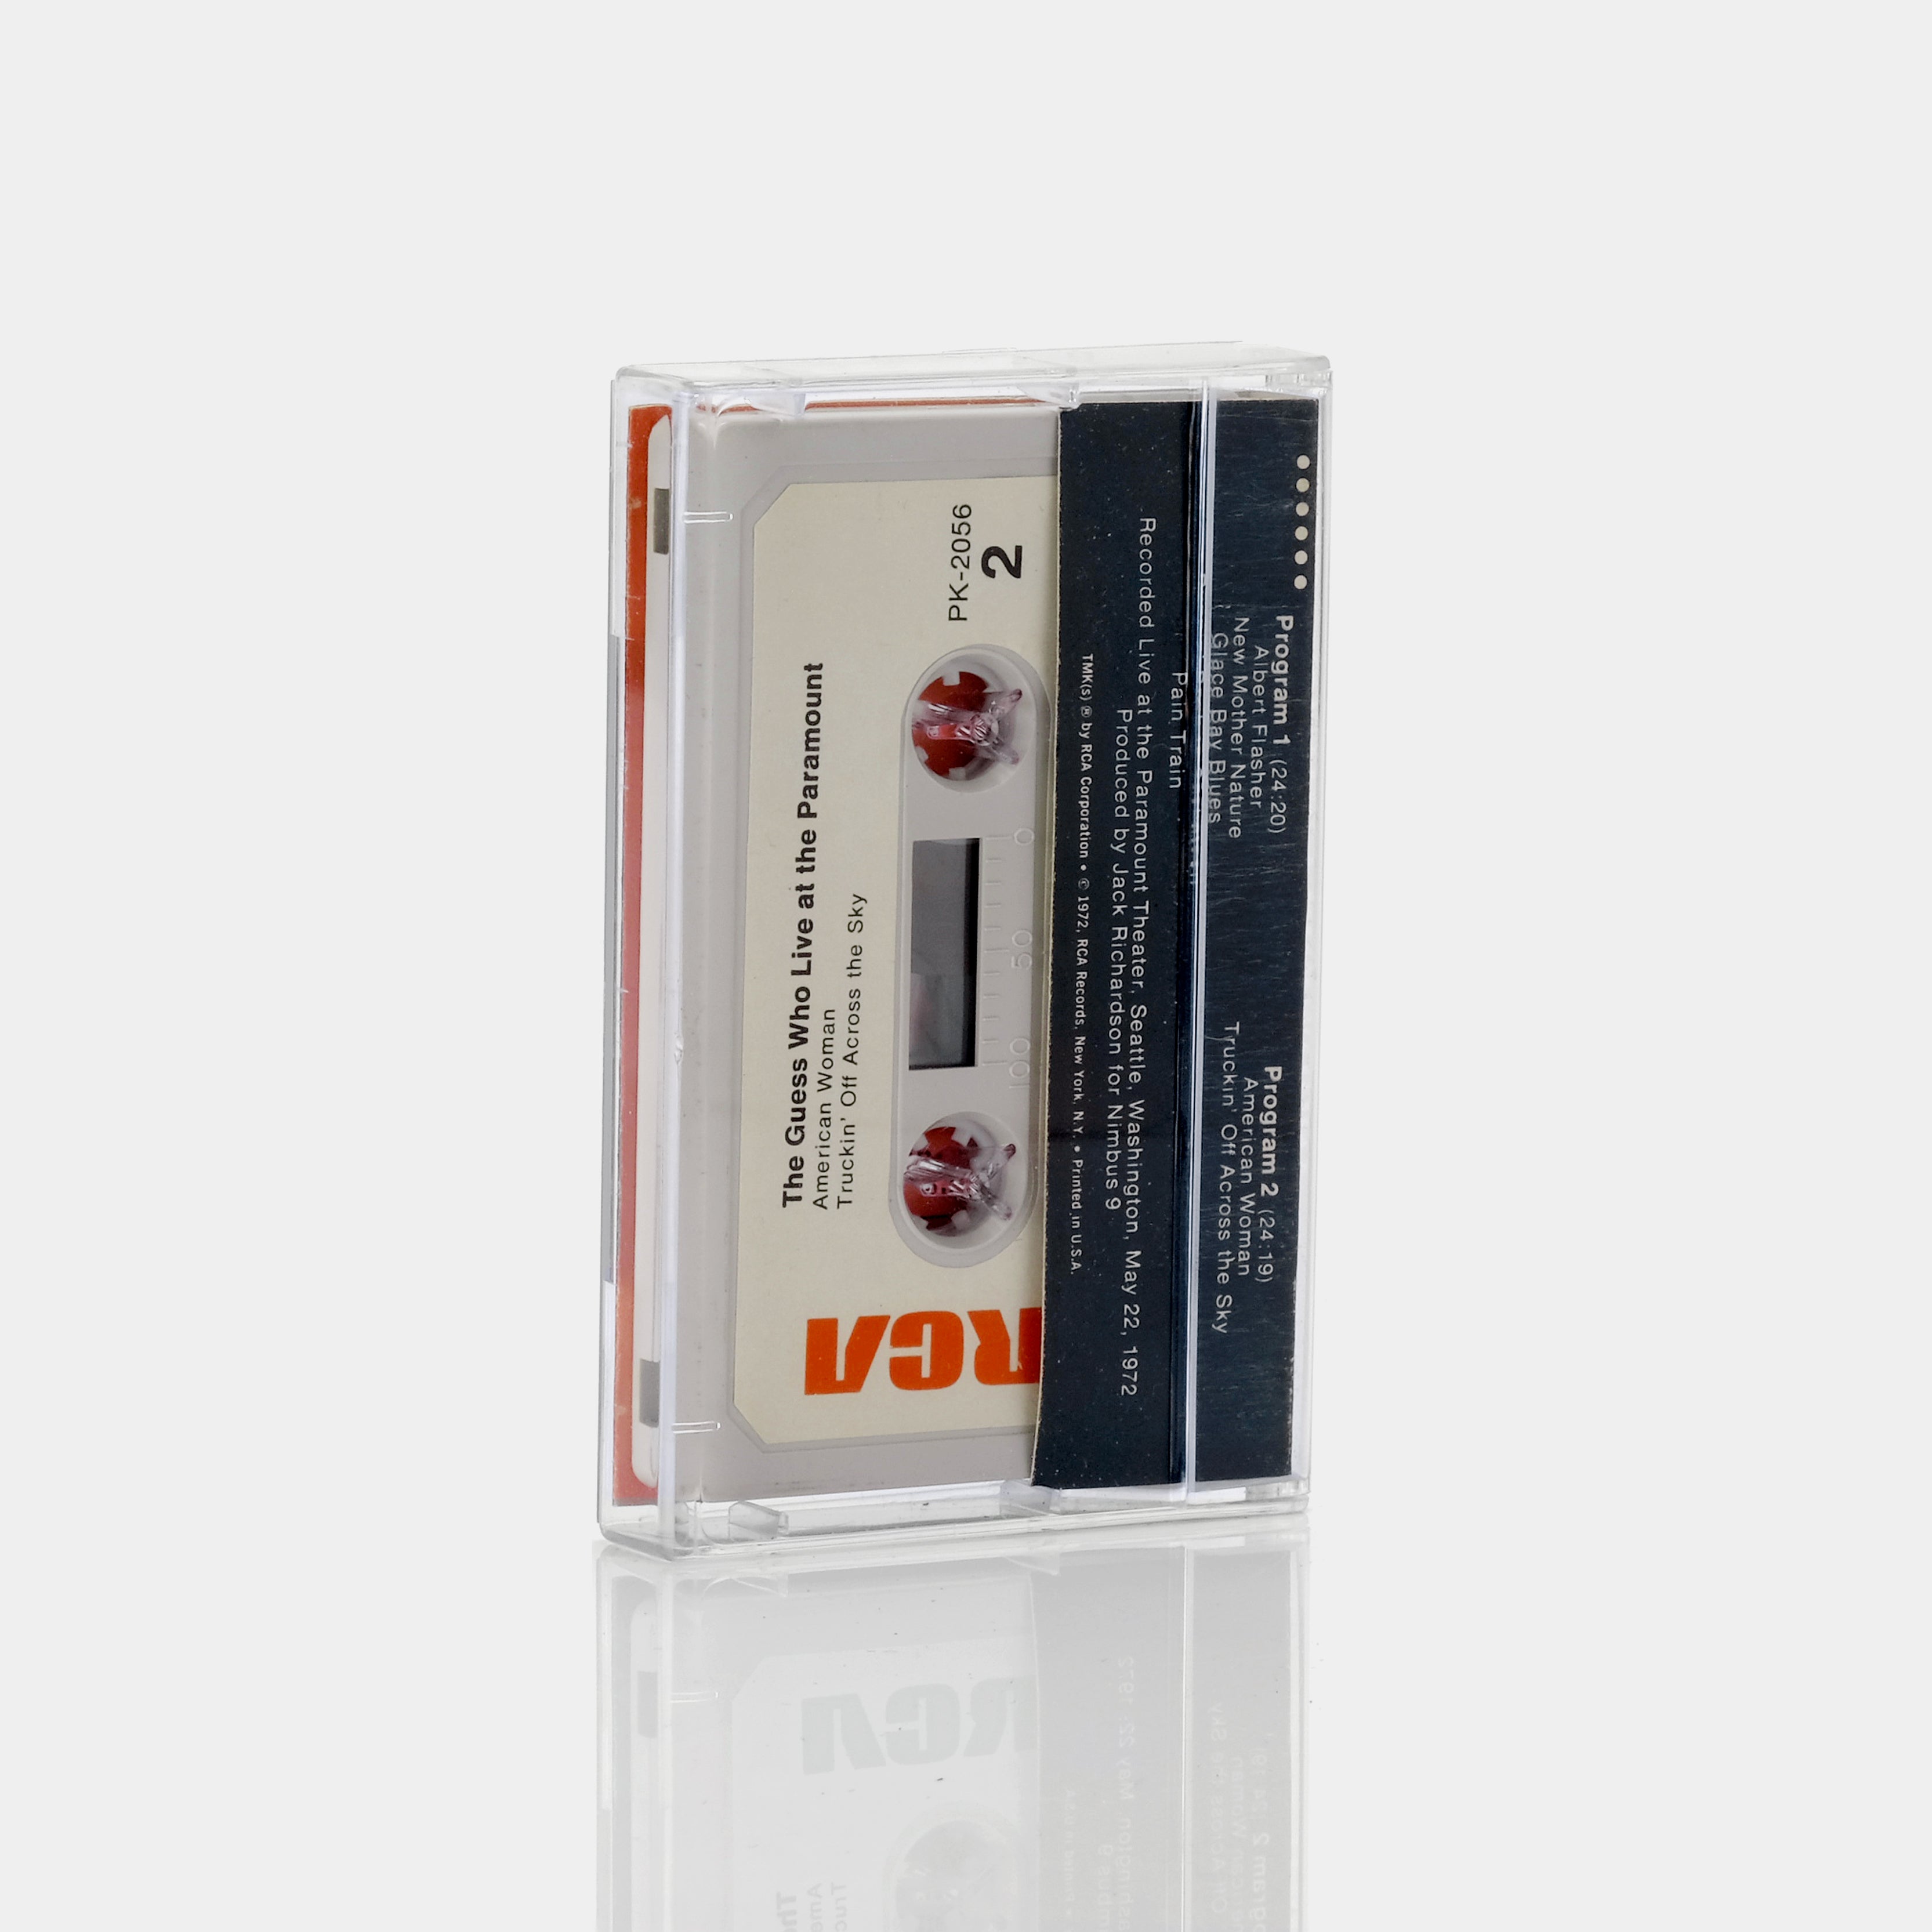 The Guess Who - Live At The Paramount Cassette Tape